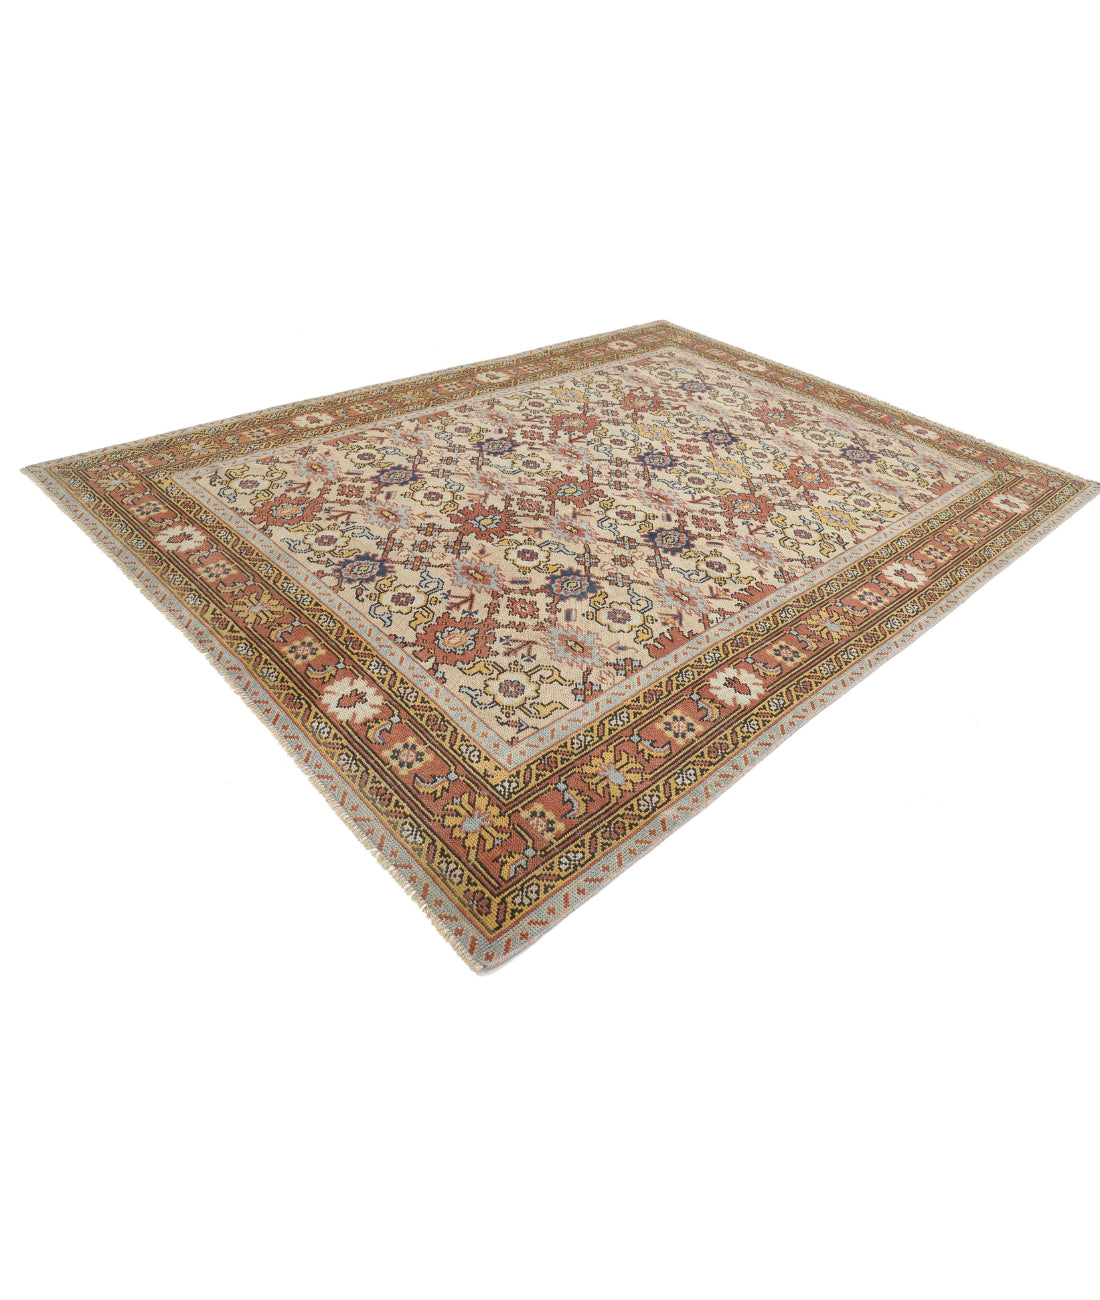 Hand Knotted Antique Turkish Oushak Wool Rug - 8'0'' x 11'0'' 8'0'' x 11'0'' (240 X 330) / Ivory / Rust